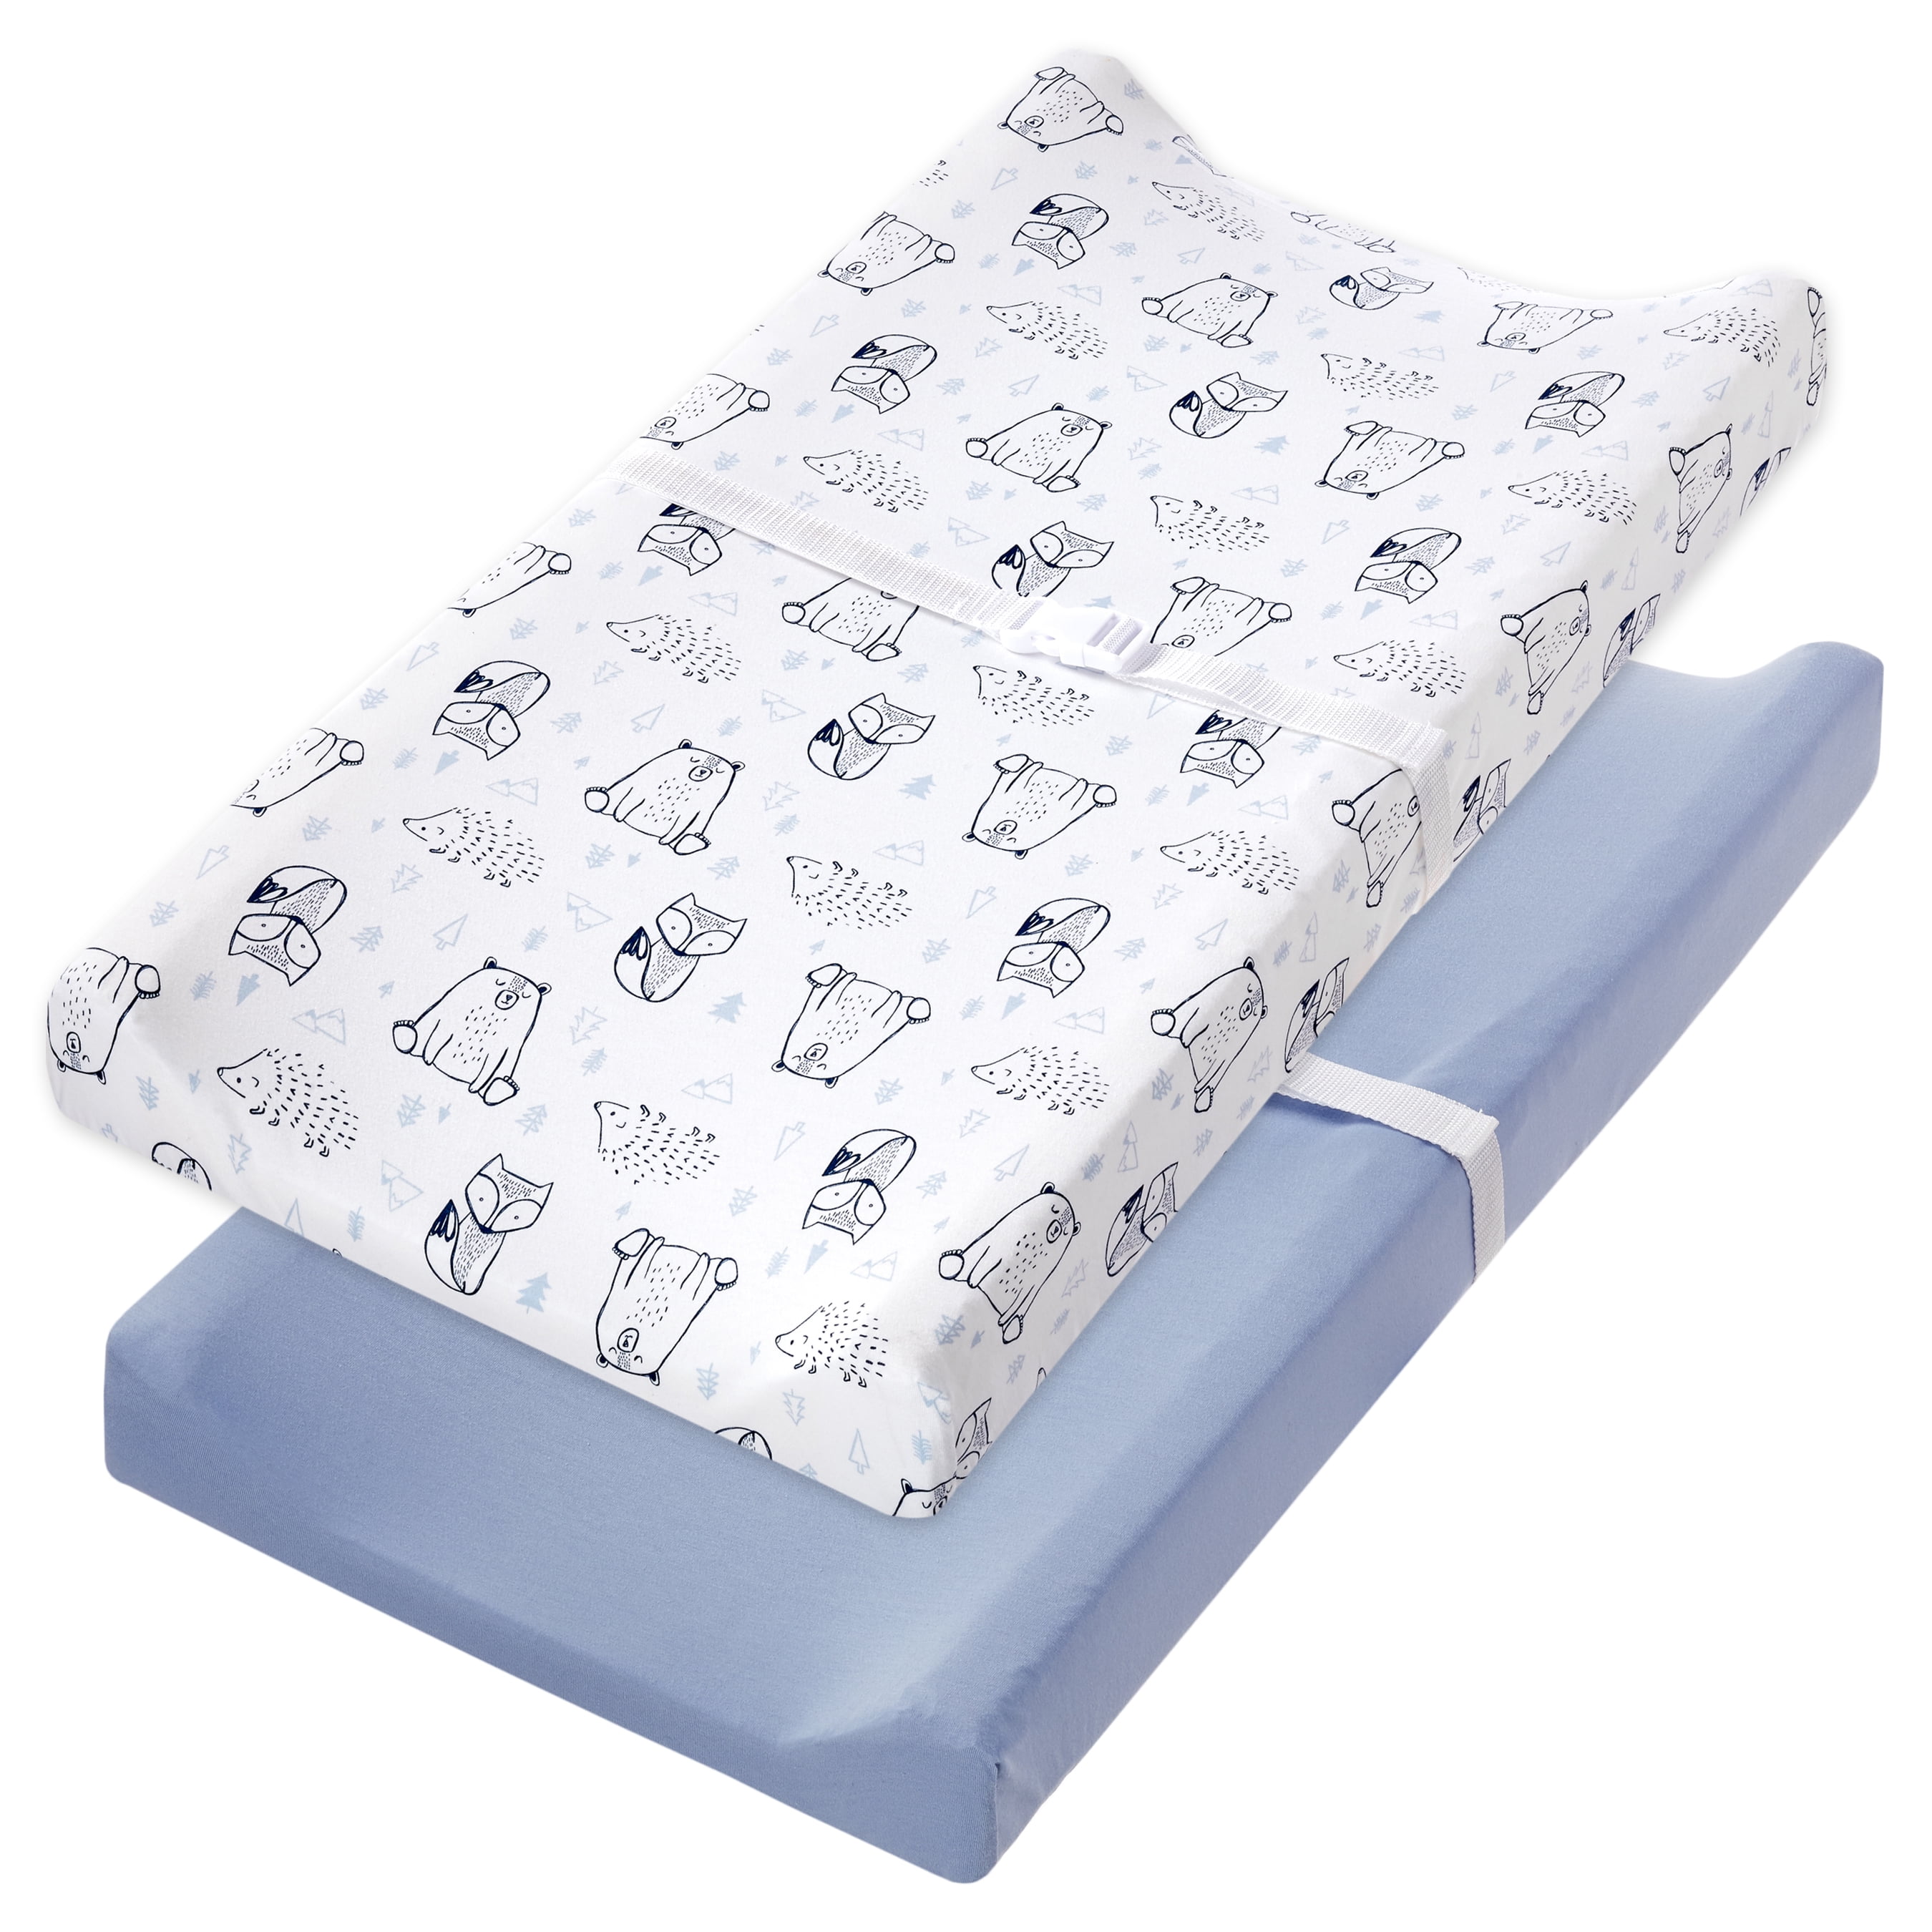 Supersoft Mist Blue Organic Cotton Gauze Baby Changing Pad Cover + Reviews